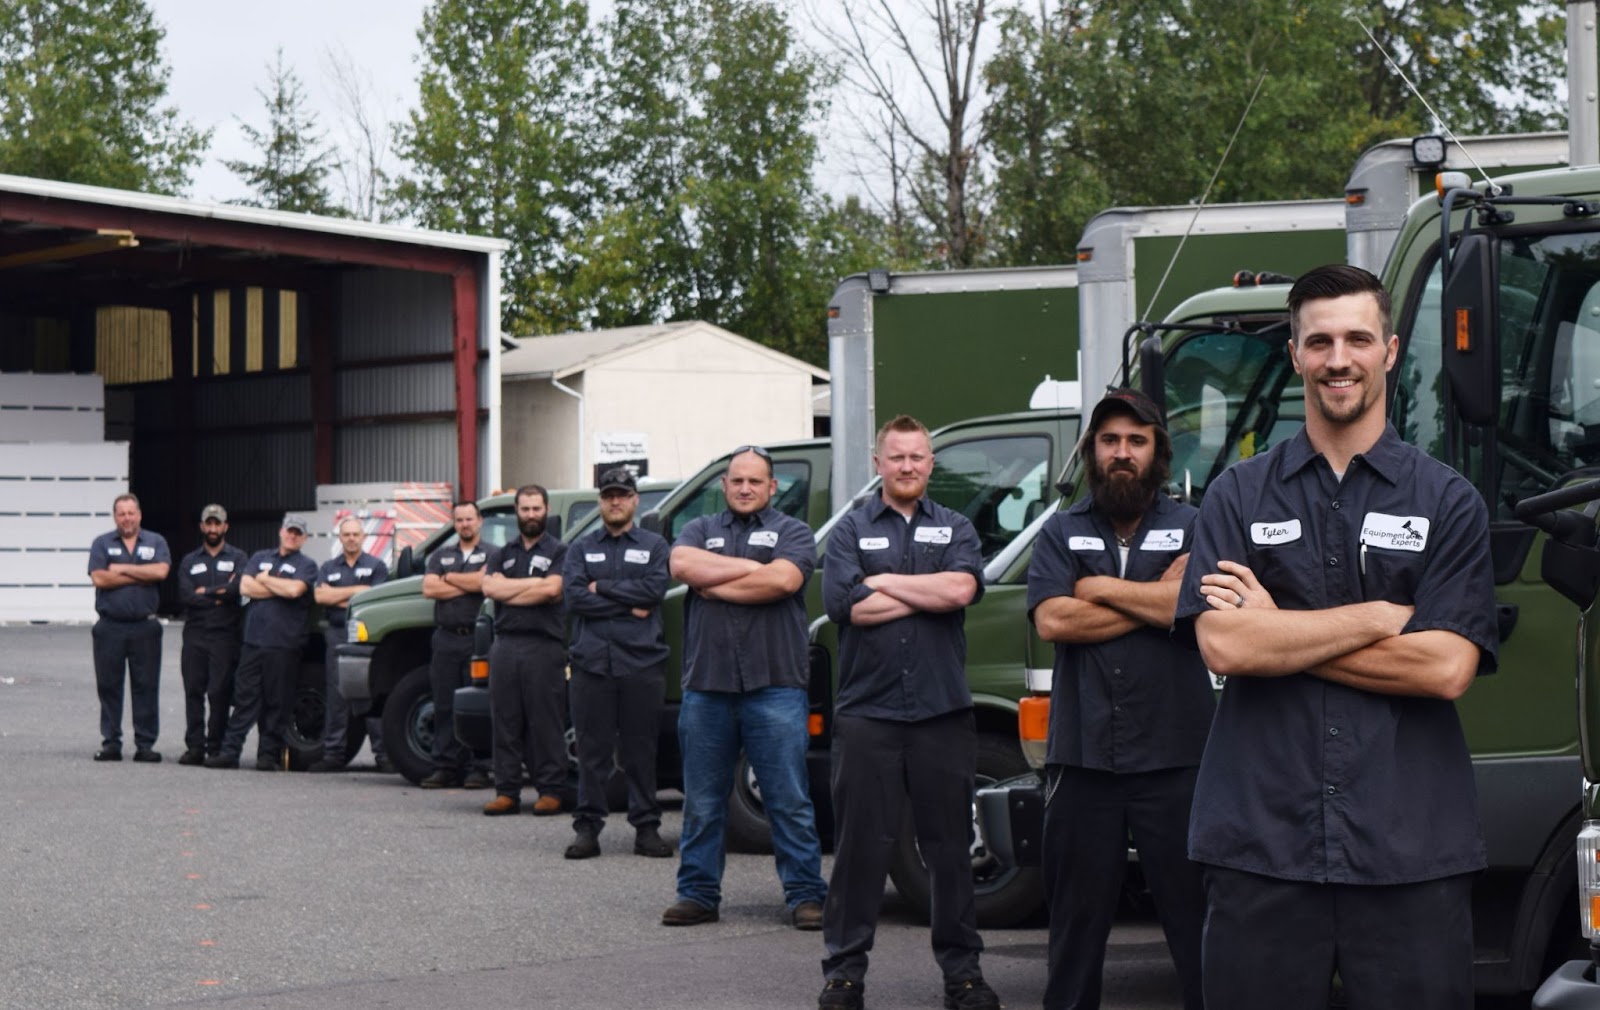 A group of smiling Equipment Experts, Inc. employees standing in front of a diagonal line of trucks